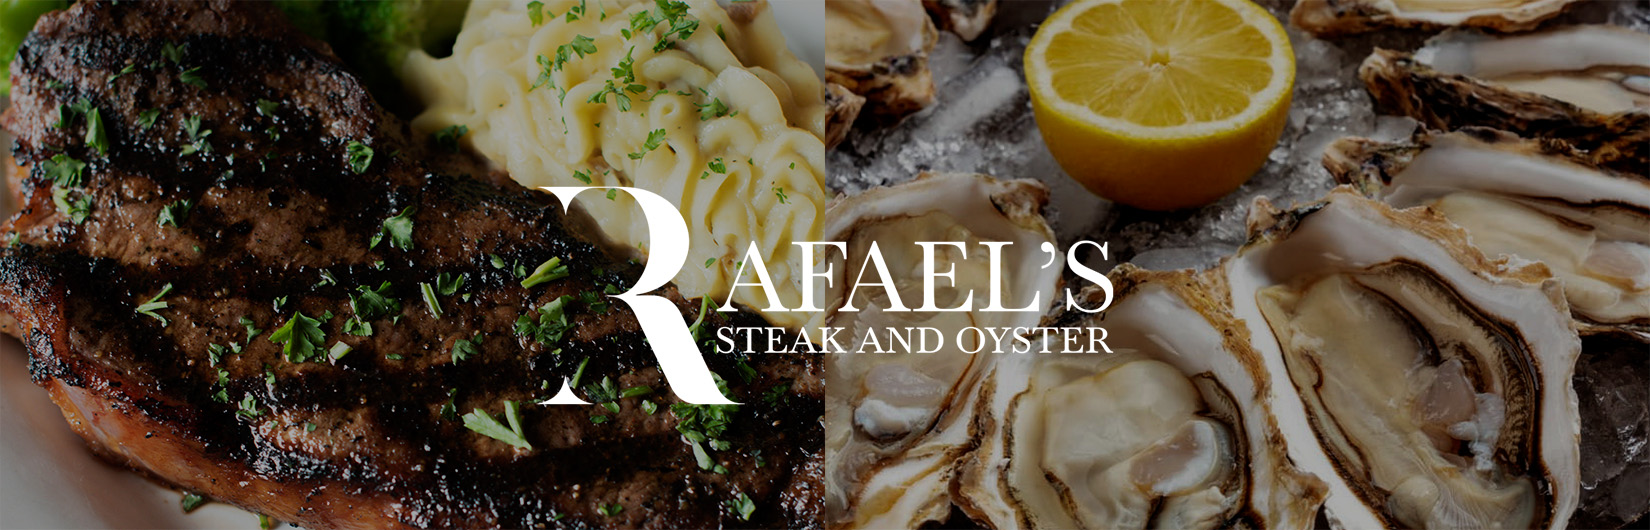 Rafael's Steak and Oyster Westminster Maryland